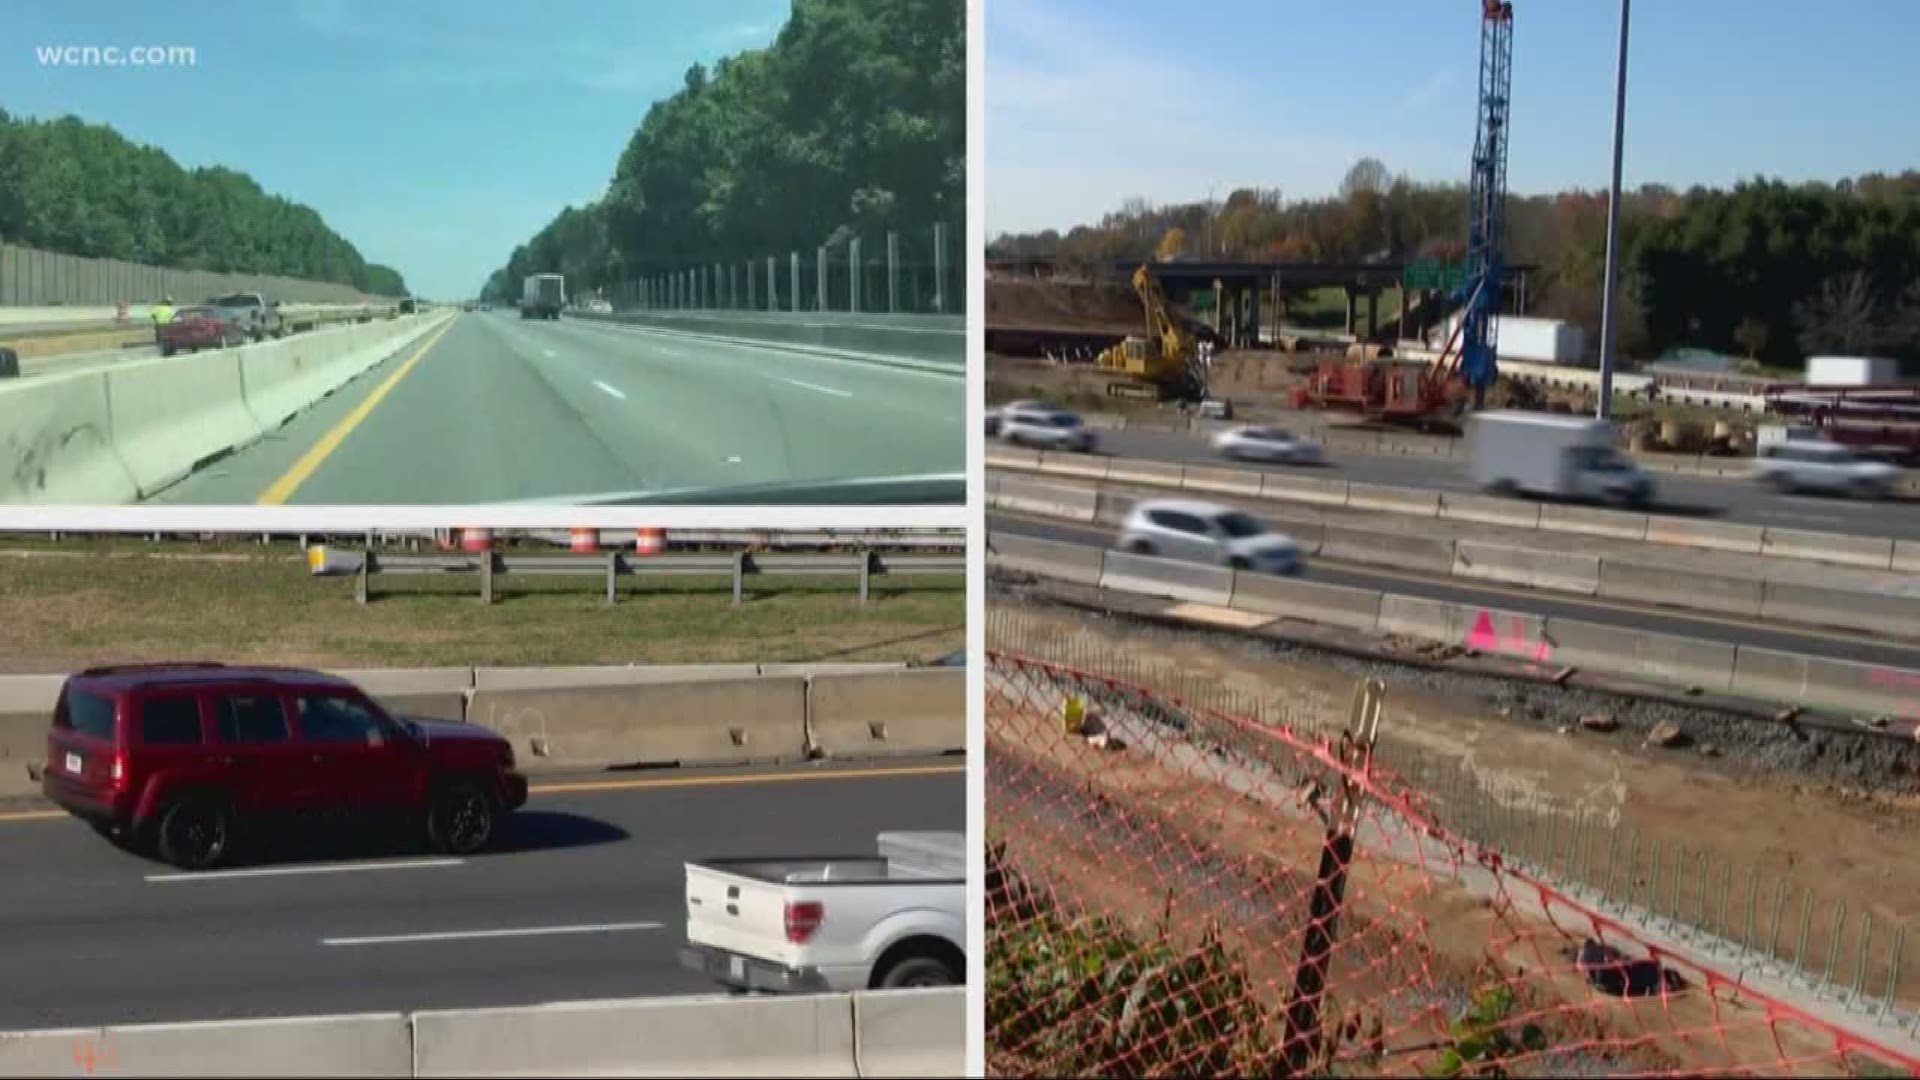 Language relating to a new bill aimed at eliminating the I-77 toll lanes has been removed from the bill.